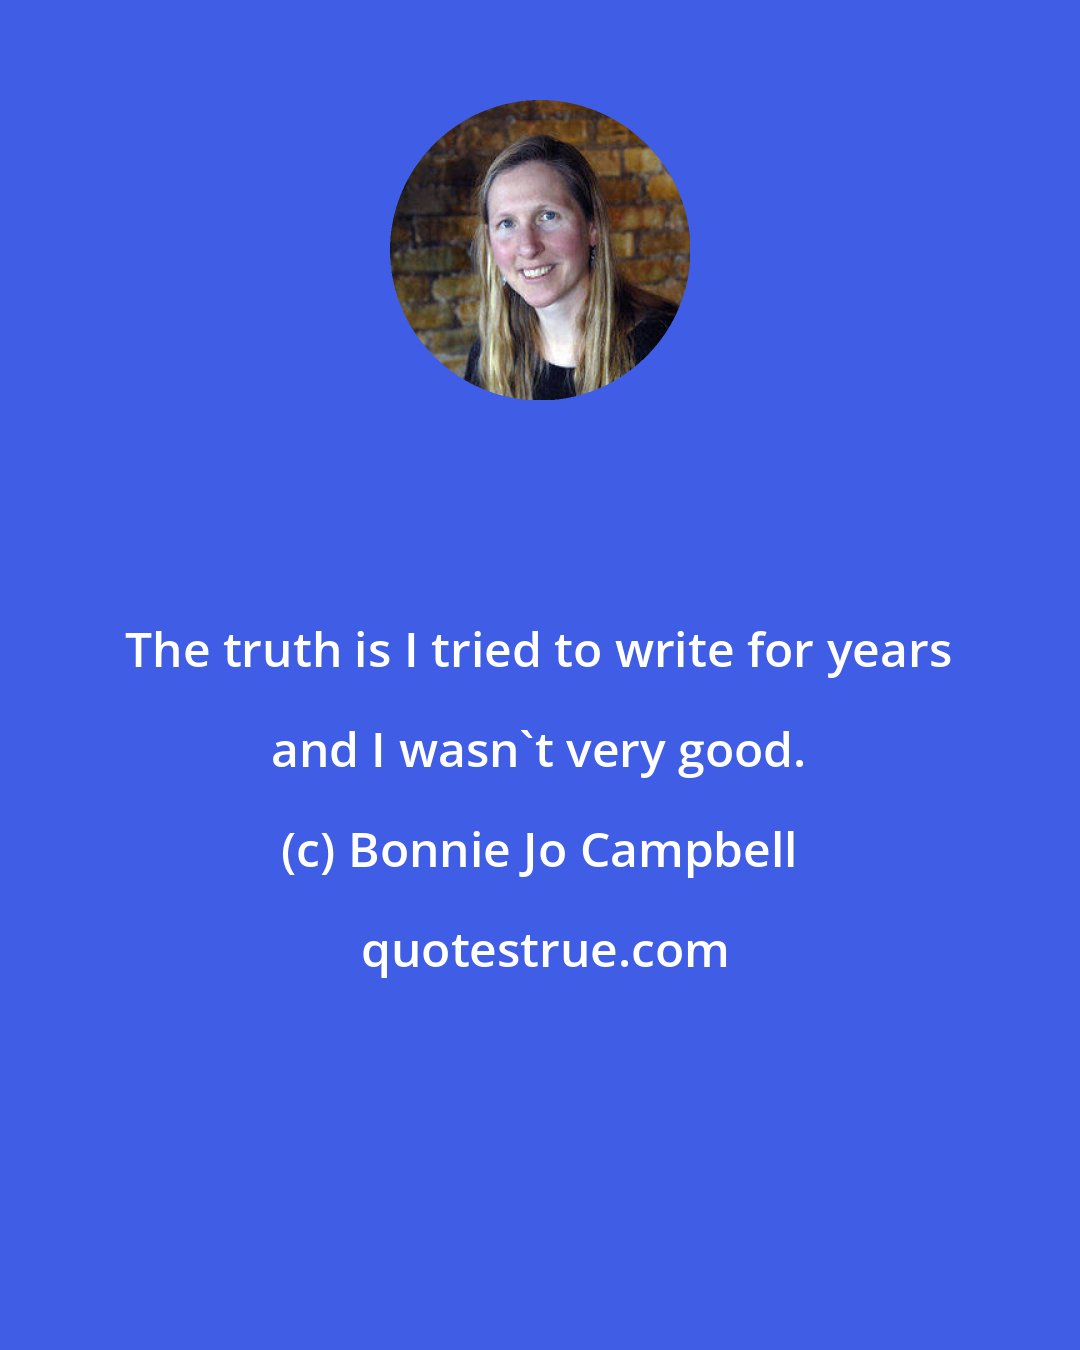 Bonnie Jo Campbell: The truth is I tried to write for years and I wasn't very good.